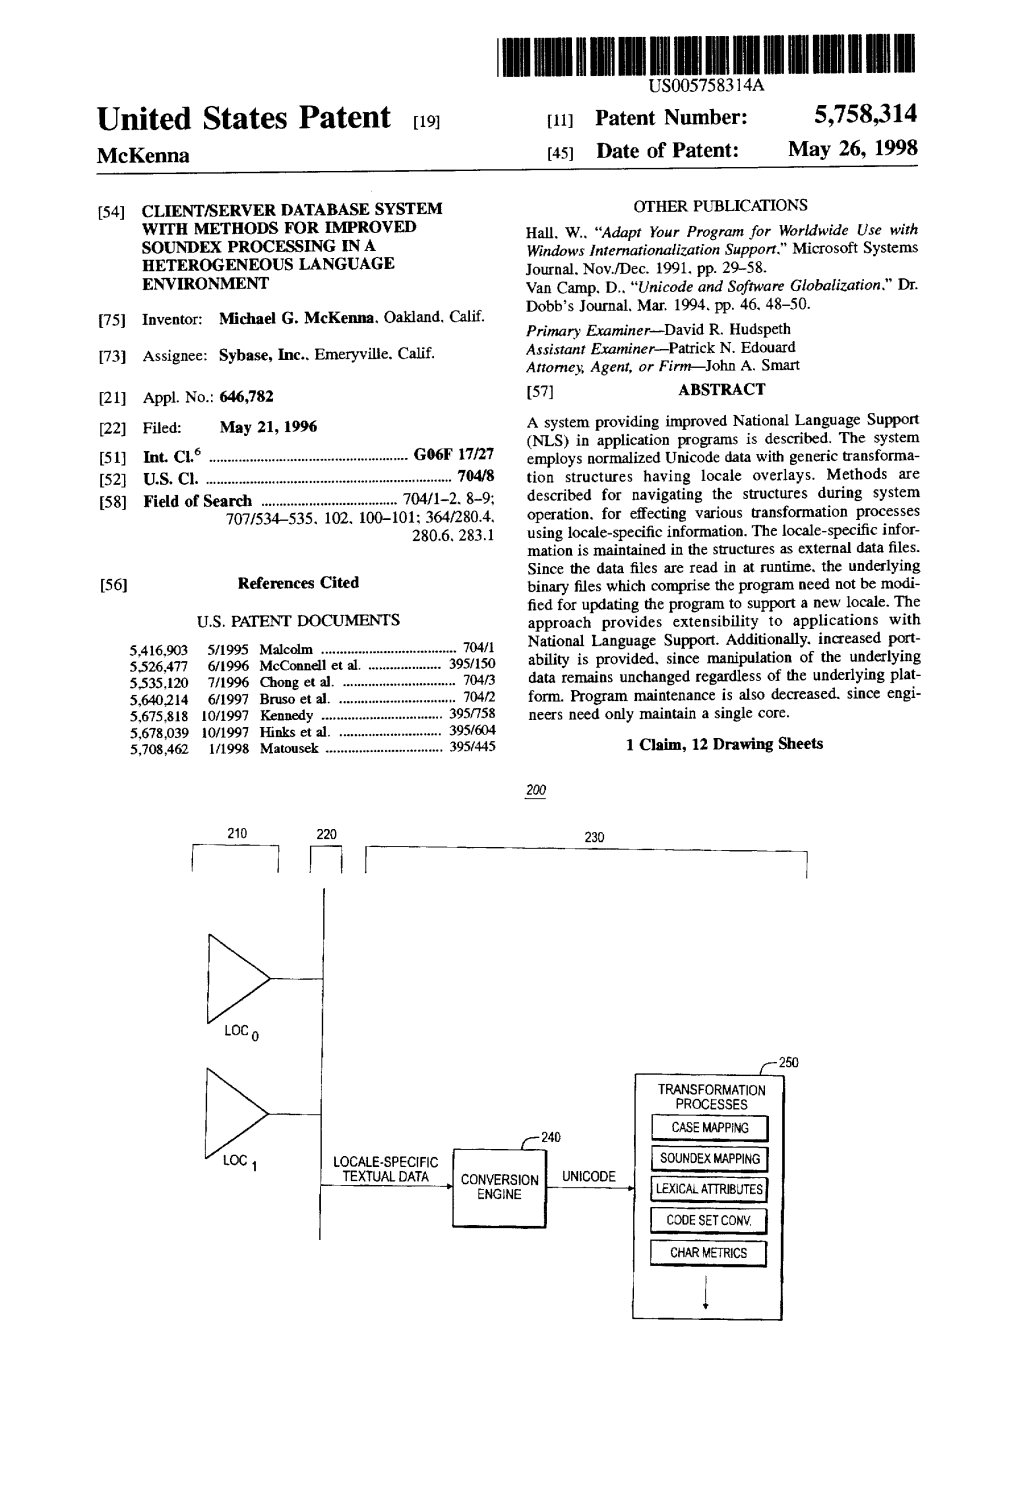 United States Patent (19) 11 Patent Number: 5,758,314 Mckenna (45) Date of Patent: May 26, 1998